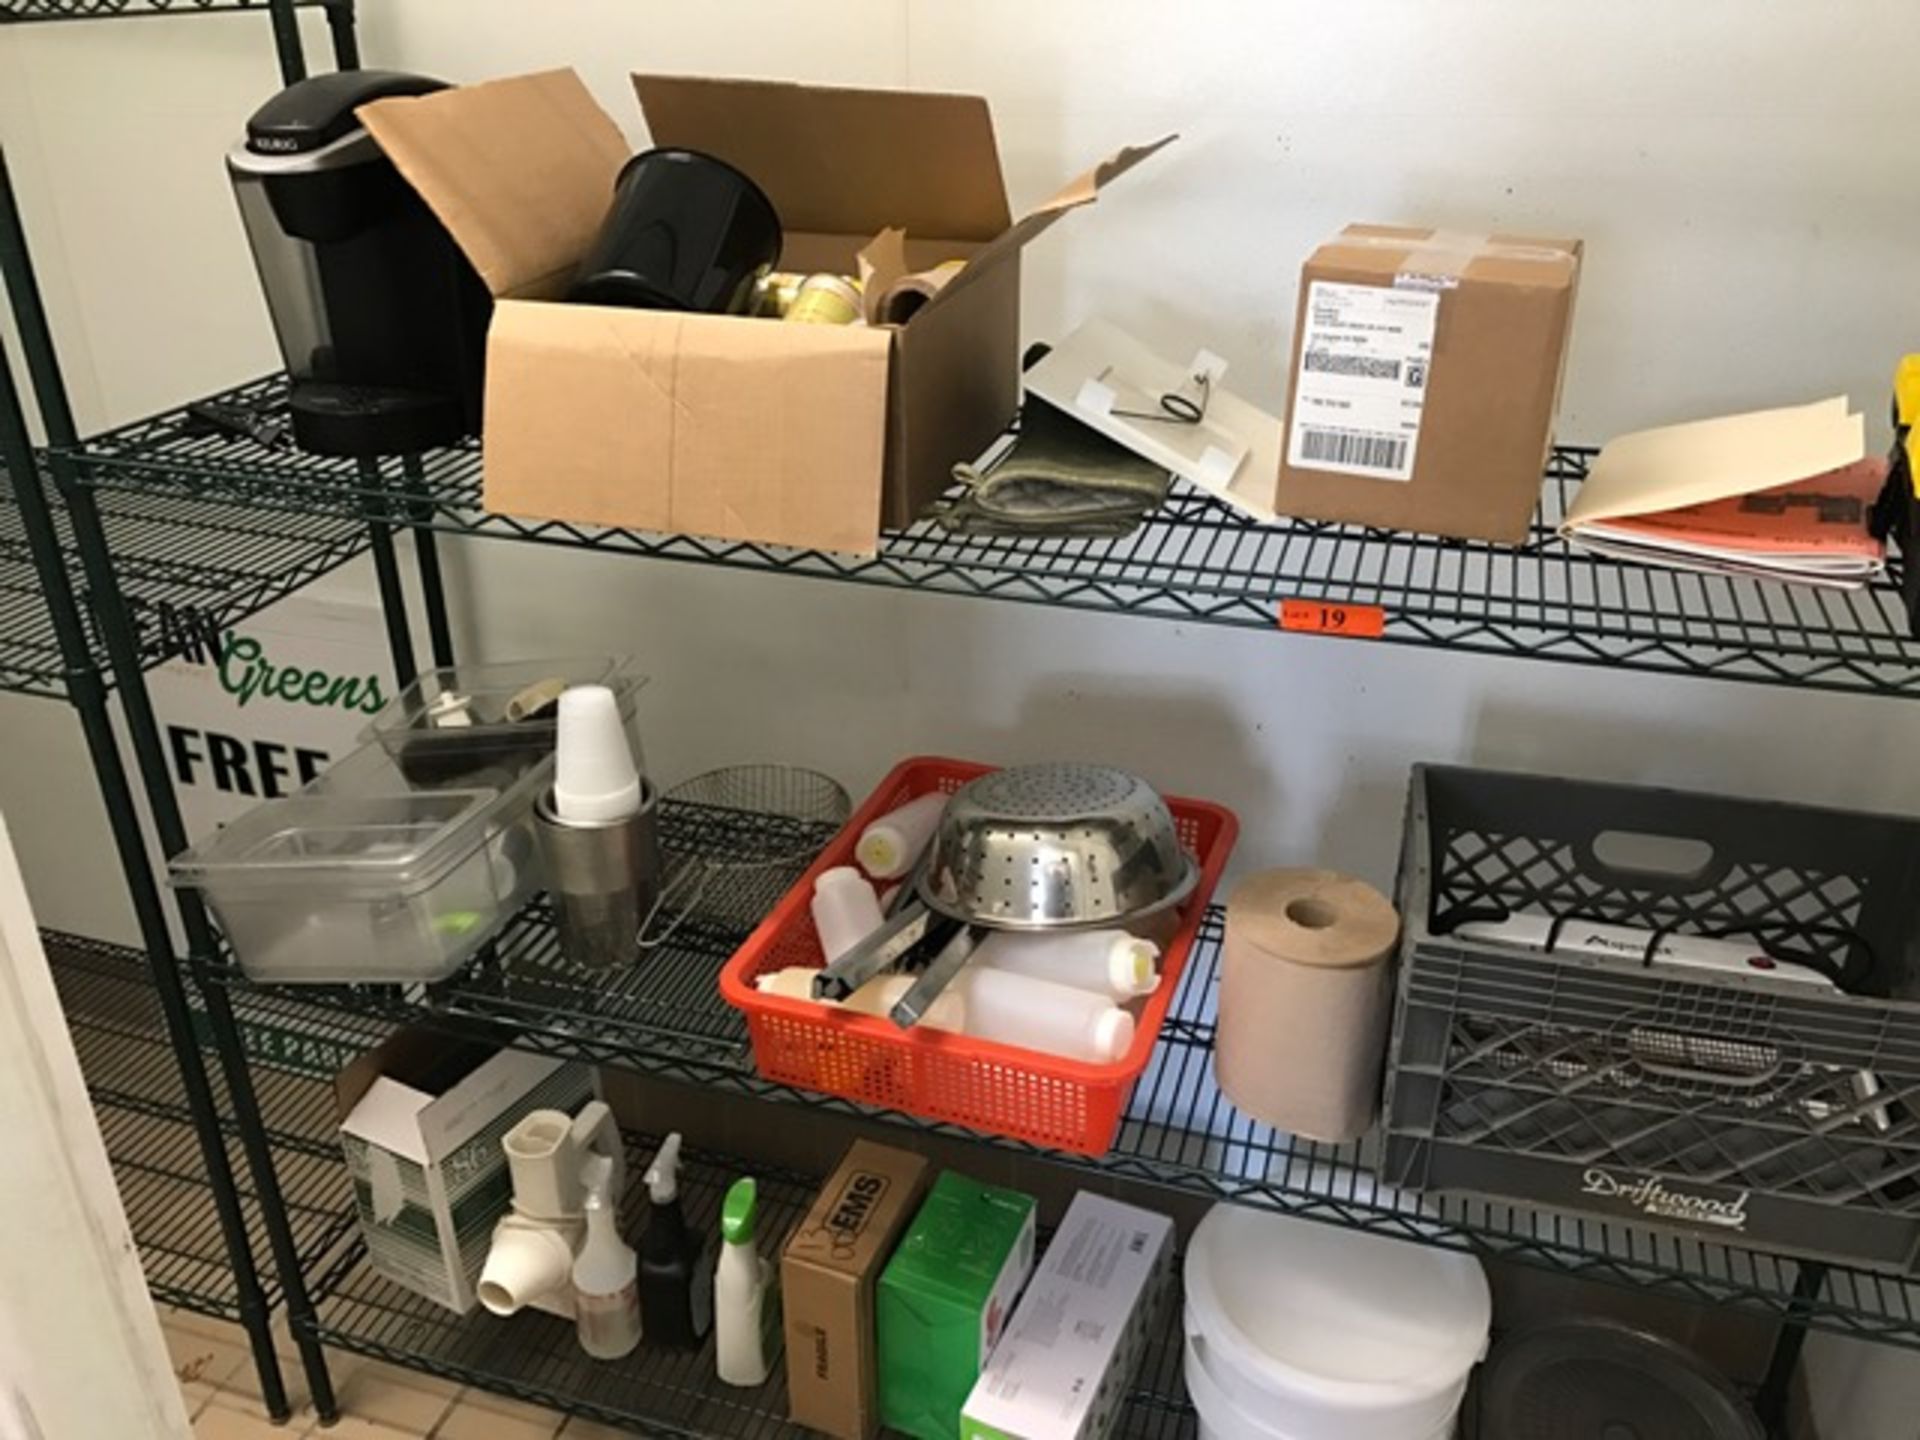 LOT OF MISCELLANEOUS ITEMS - CONTENTS OF RACK